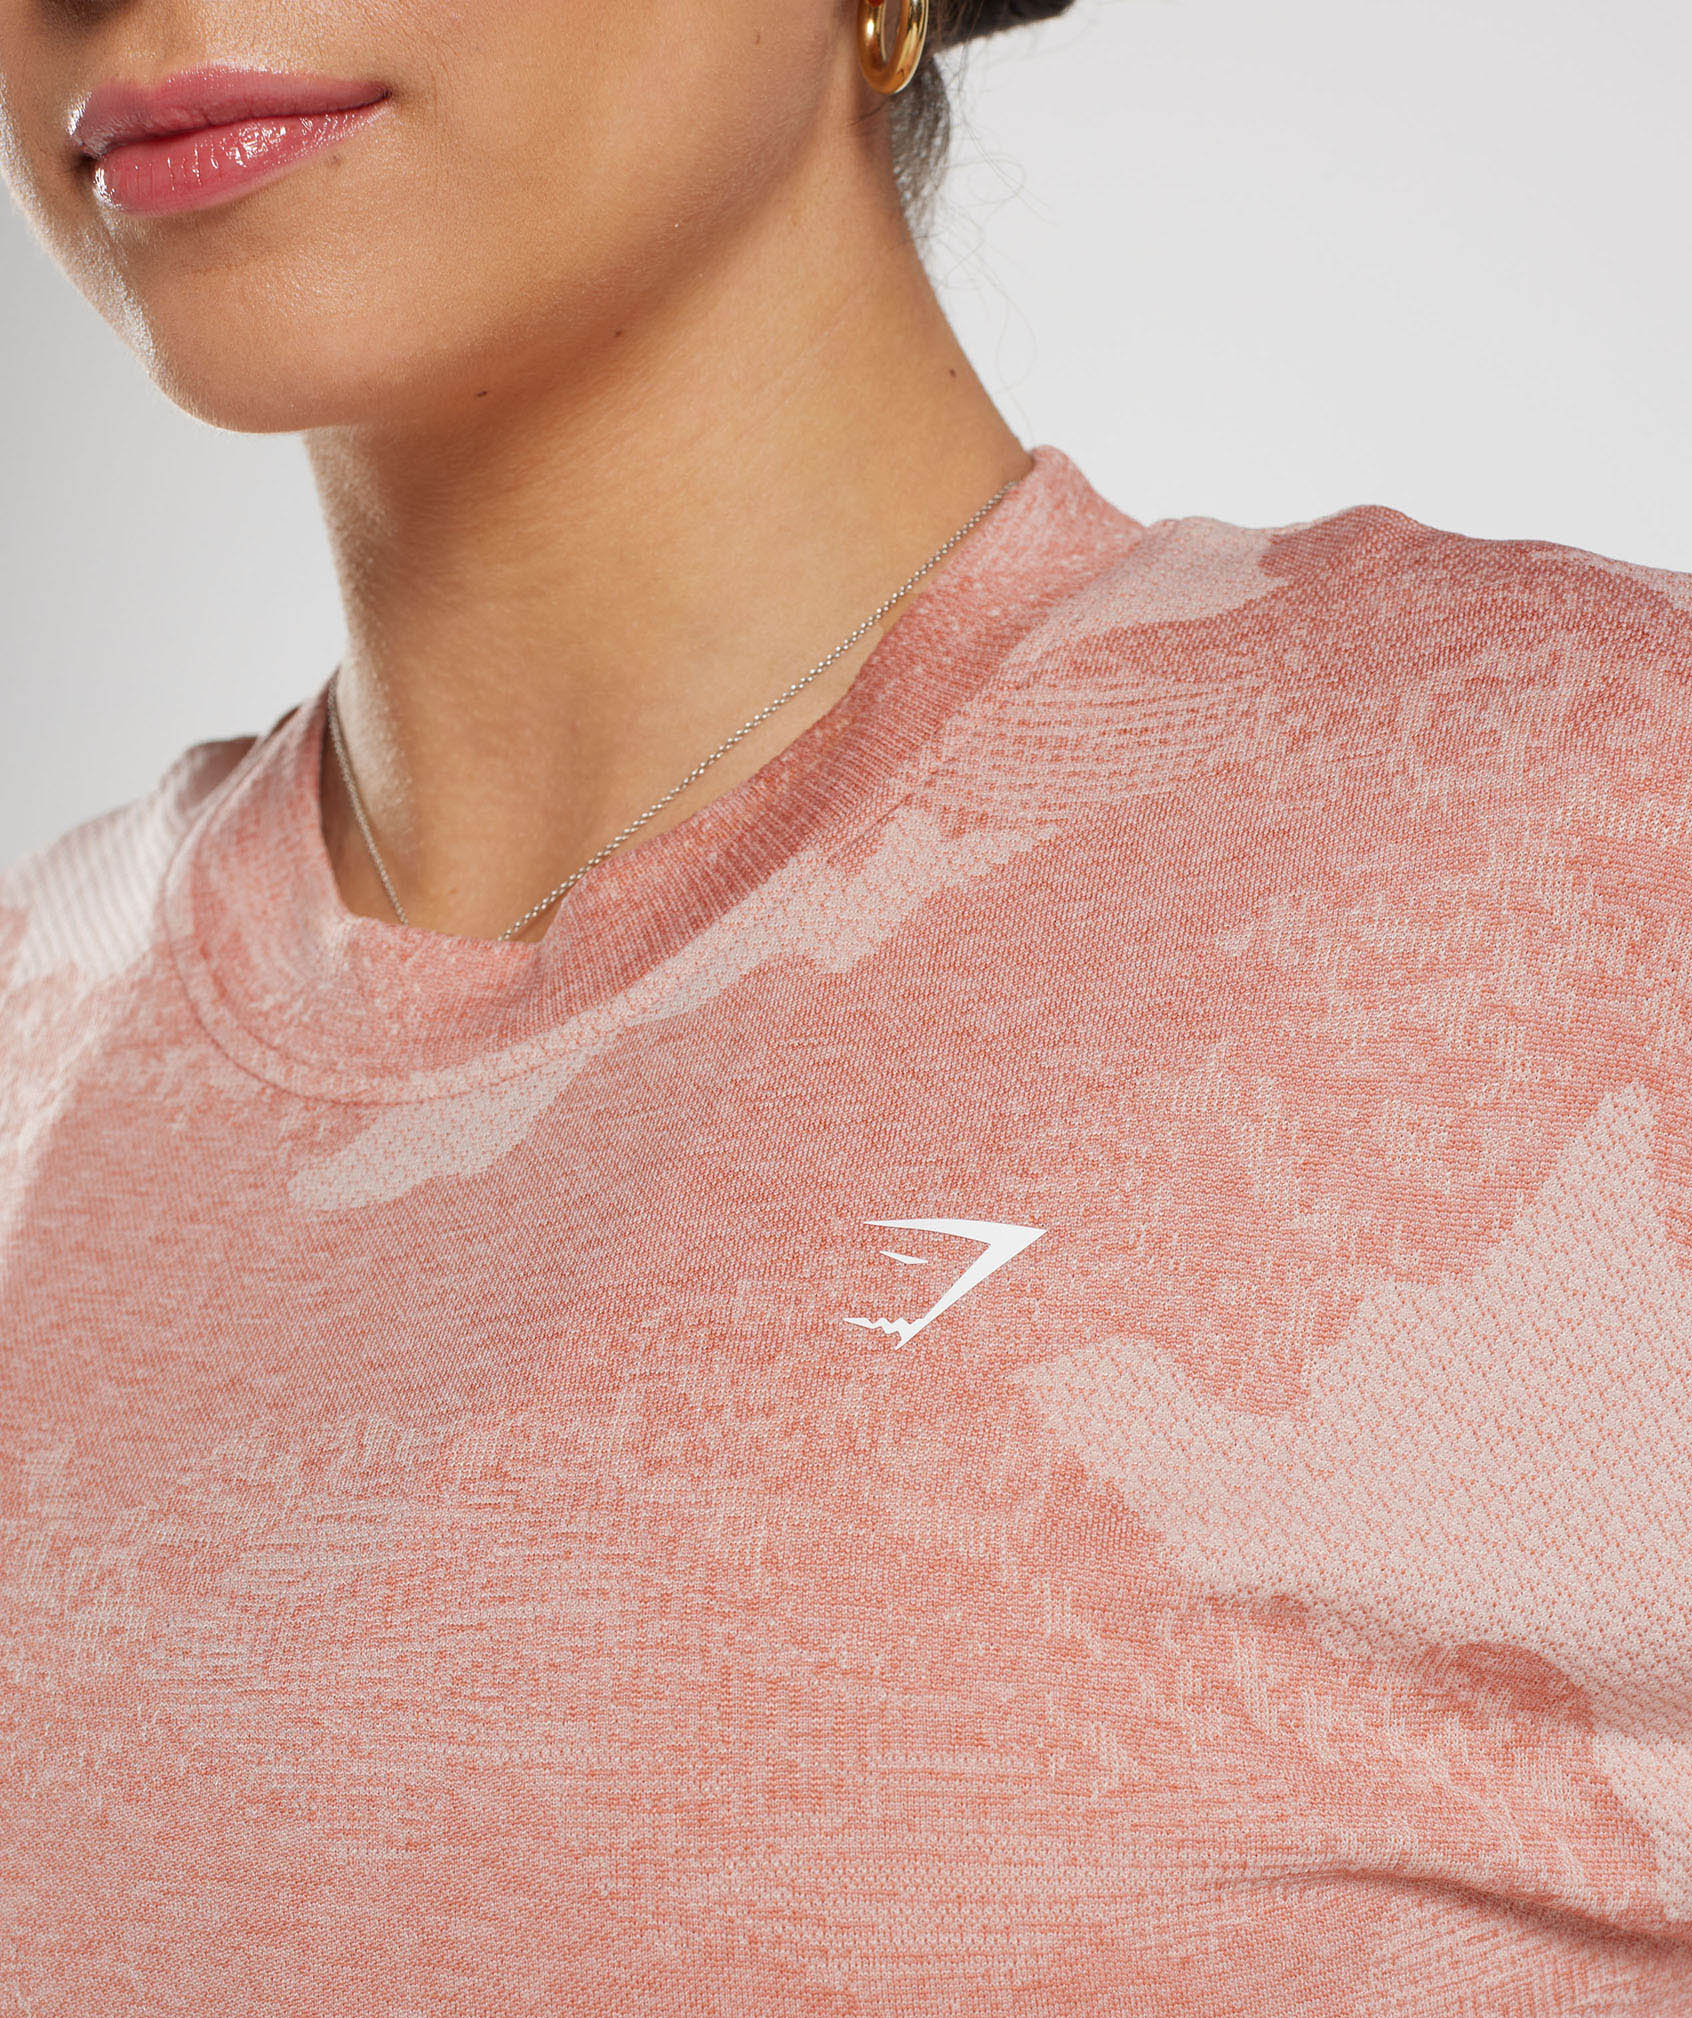 Adapt Camo Seamless Crop Top in Misty Pink/Hazy Pink - view 6